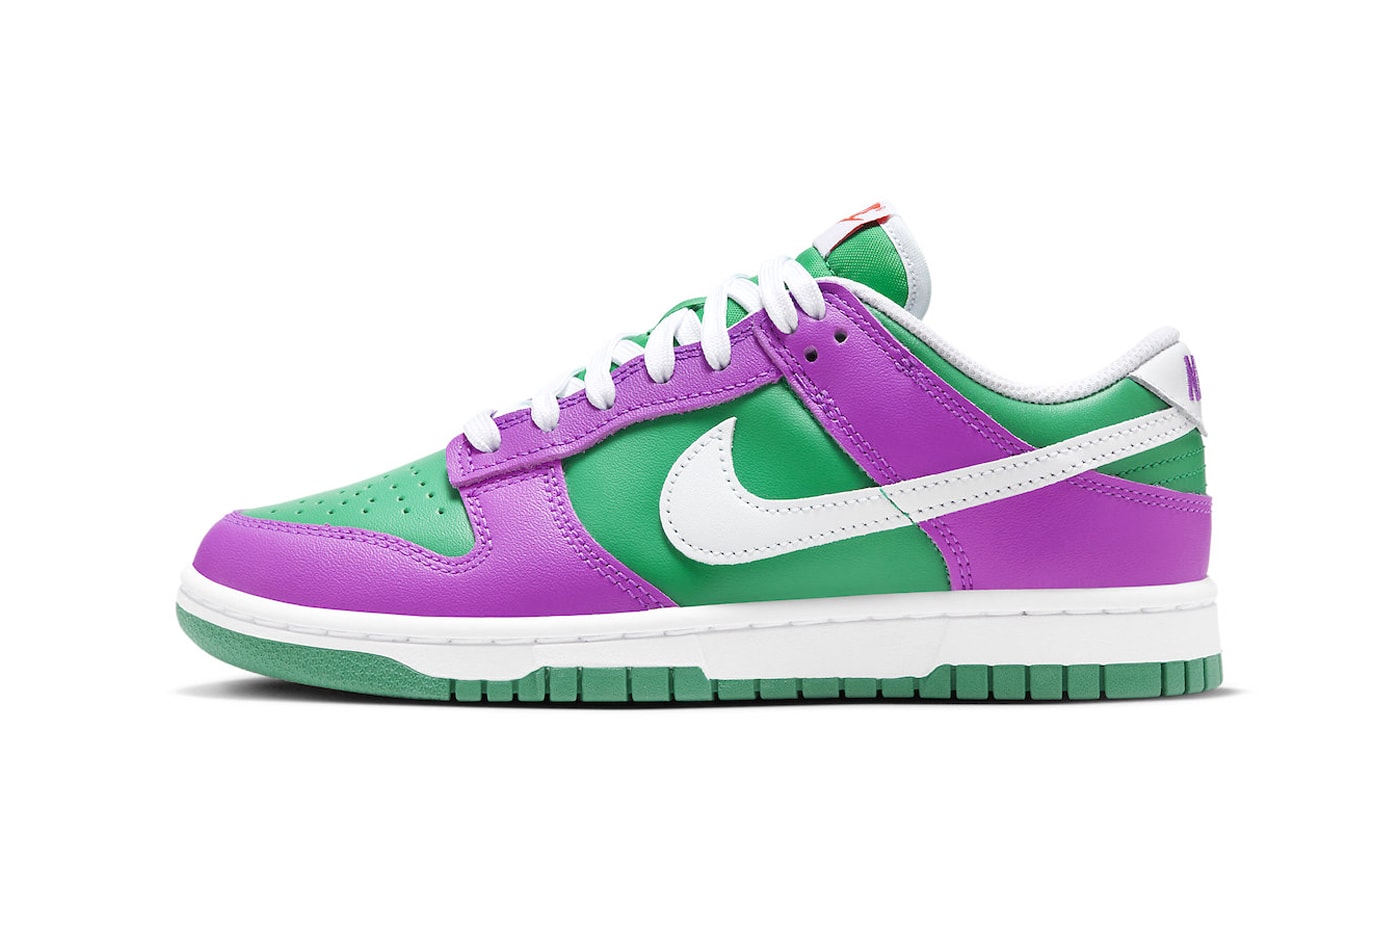  Nike Dunk Low Appears in Vibrant Stadium Green and Fuchsia Colorway FD9924-311 release info joker colors barney 